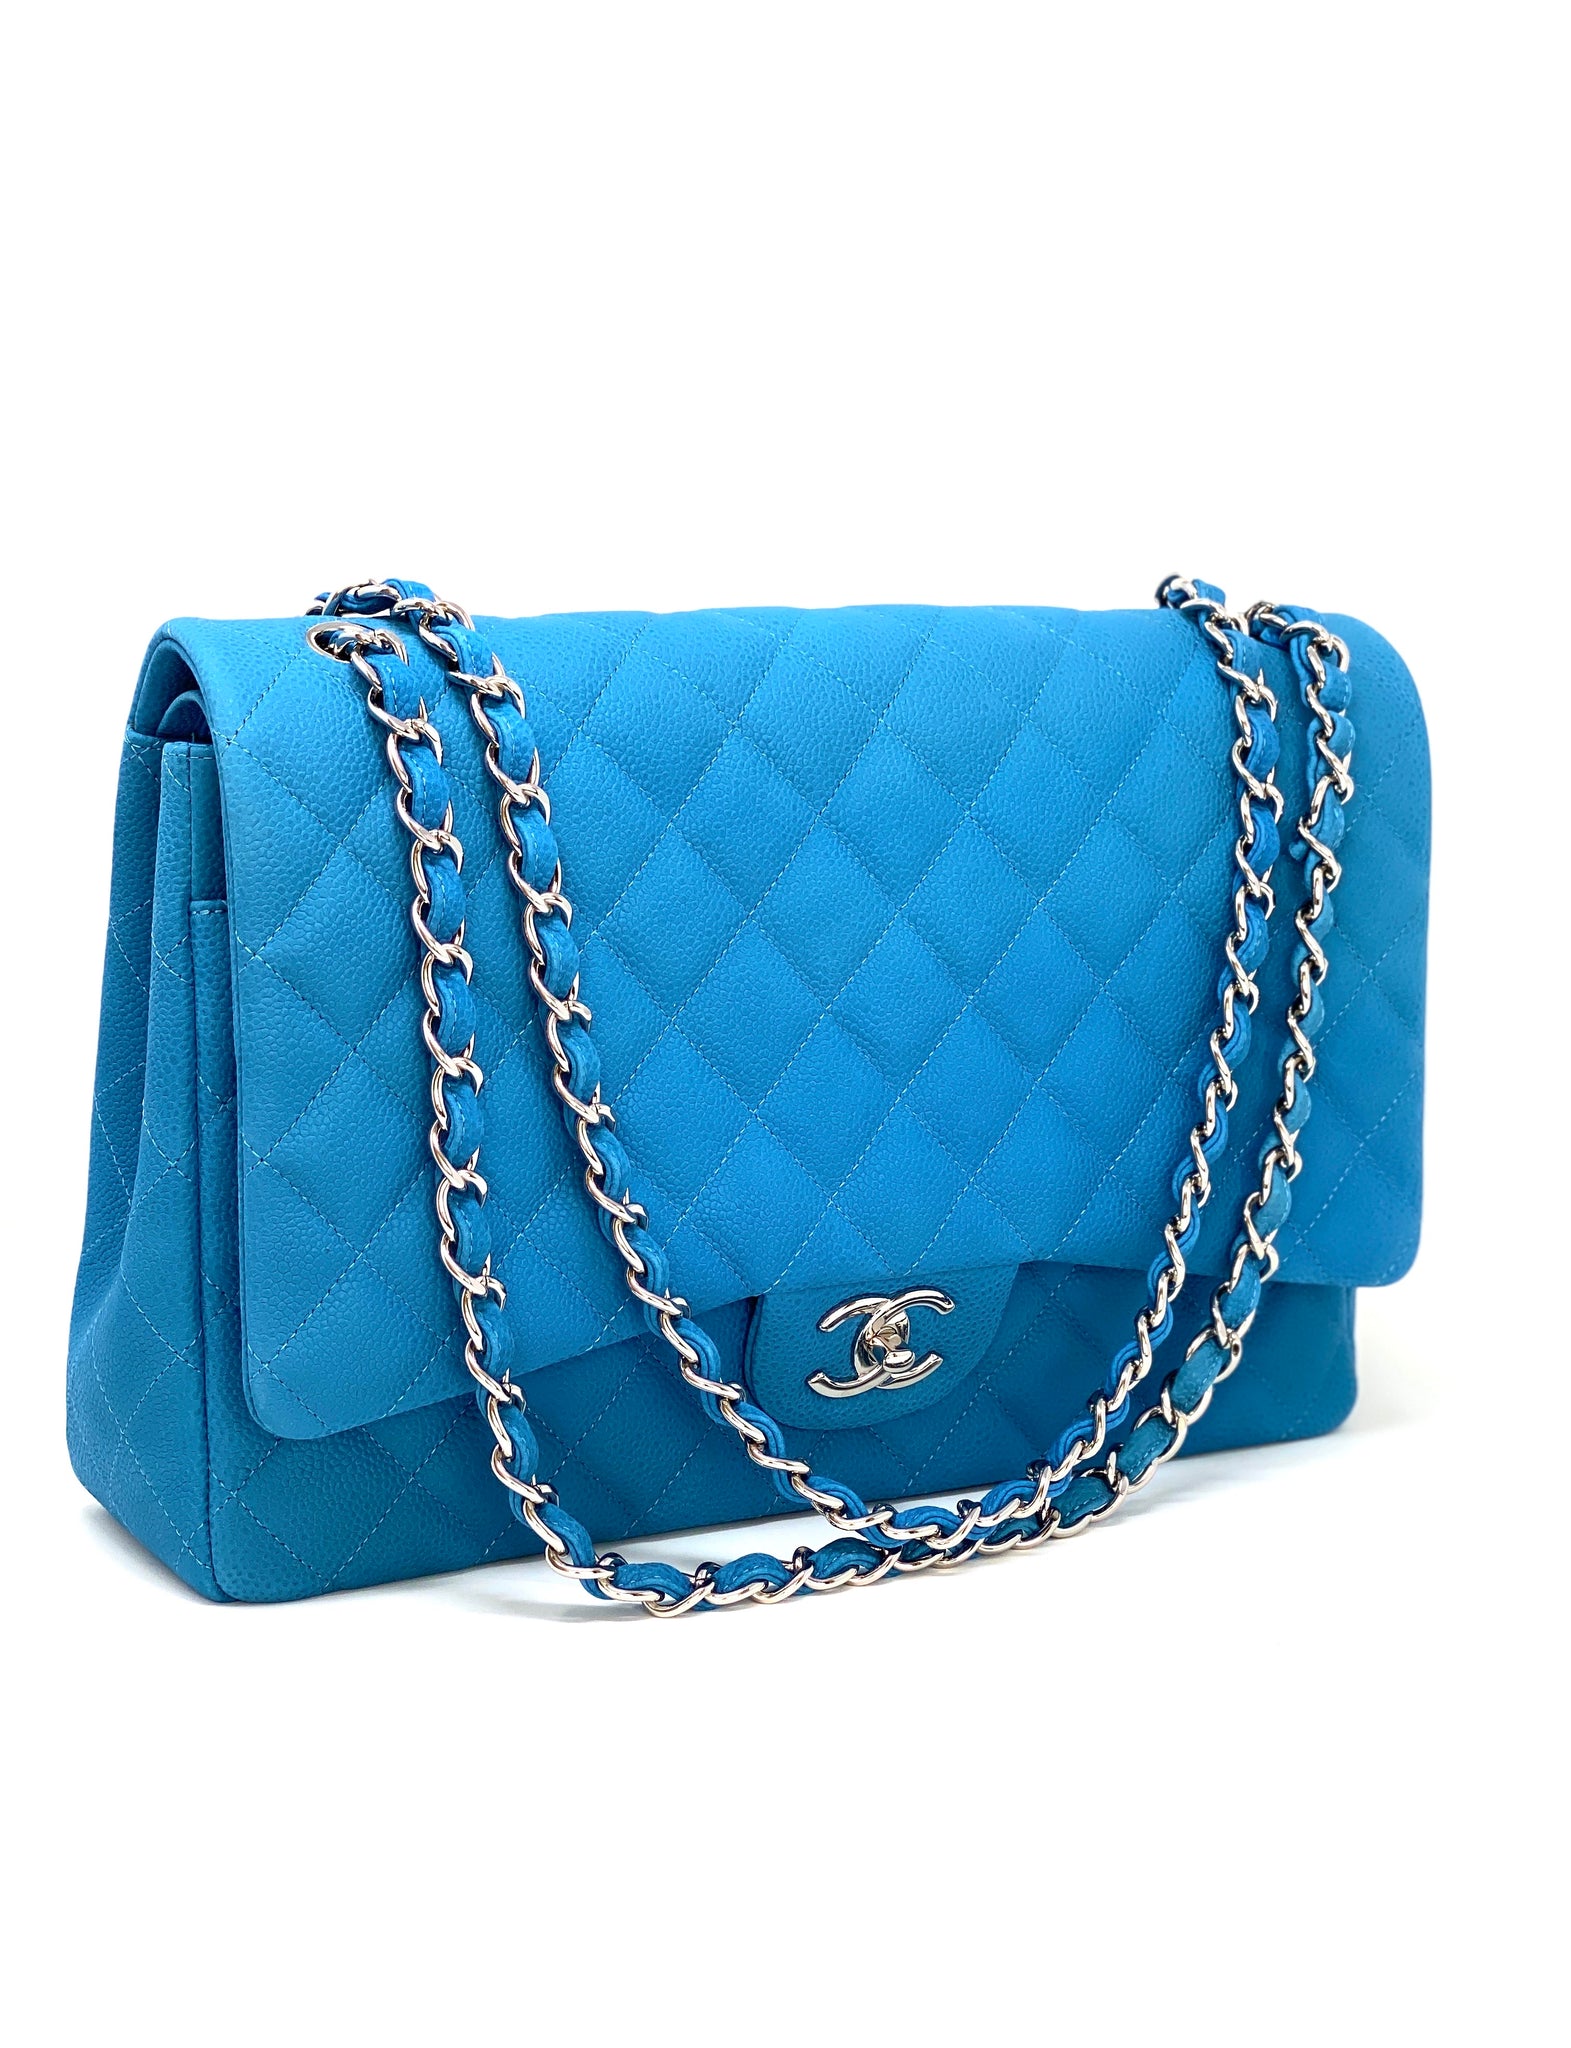 Lilly & Leopard  Chanel classic flap bag, Street style bags, Fashion